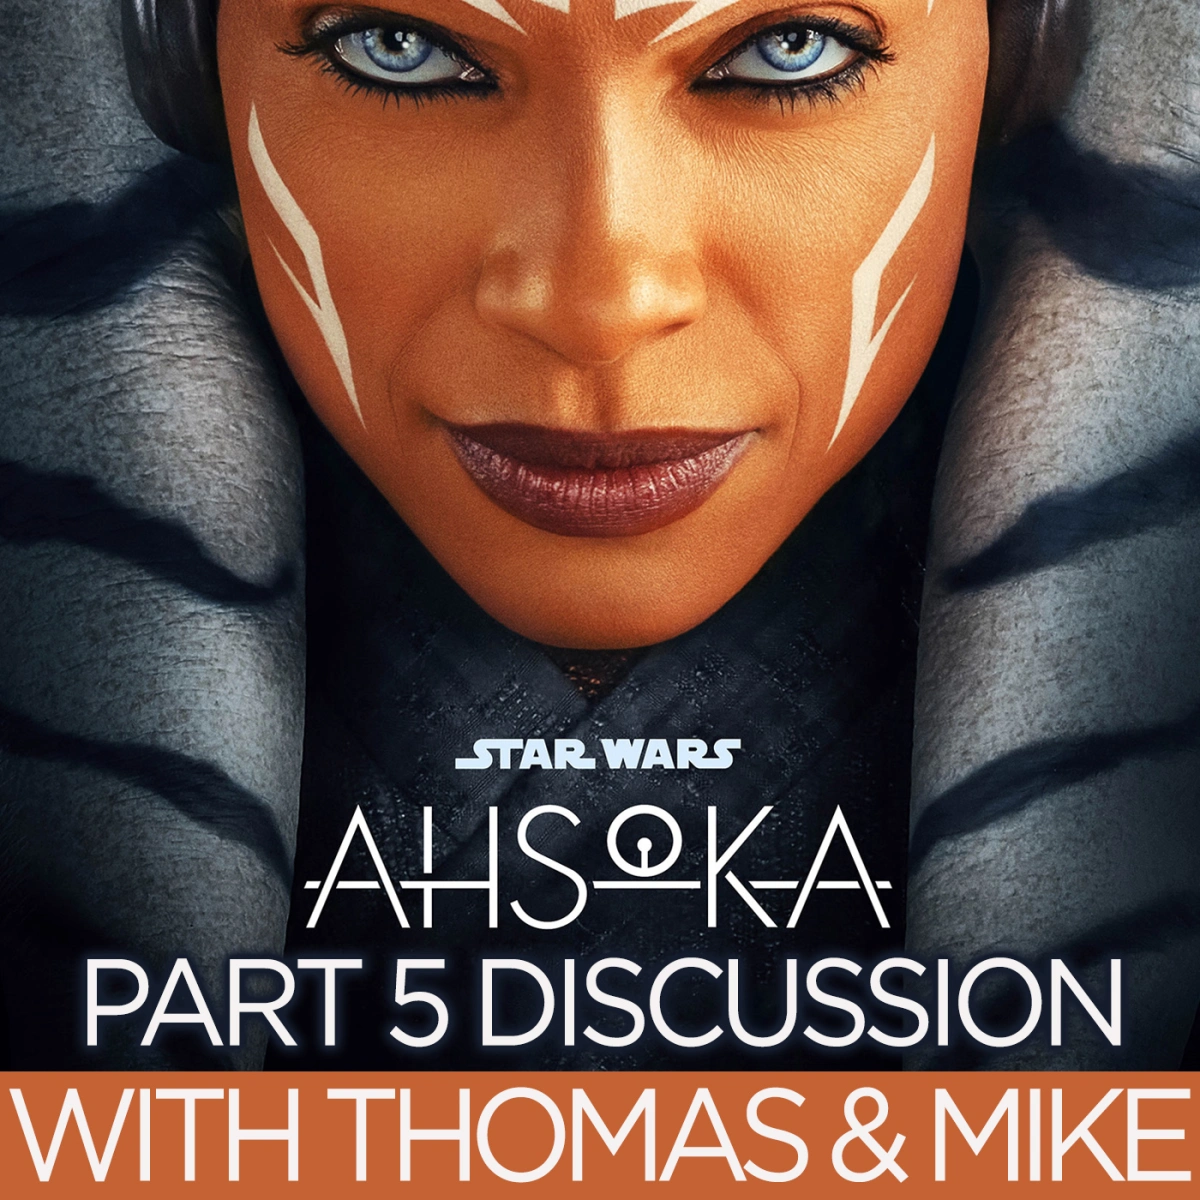 Ahsoka Part 5 Shadow Warrior: A Deep Dive Into Anakin & The World Between Worlds? Plus Jacen Syndulla, Huyang, The New Republic & More! With Thomas Rochester & Mike